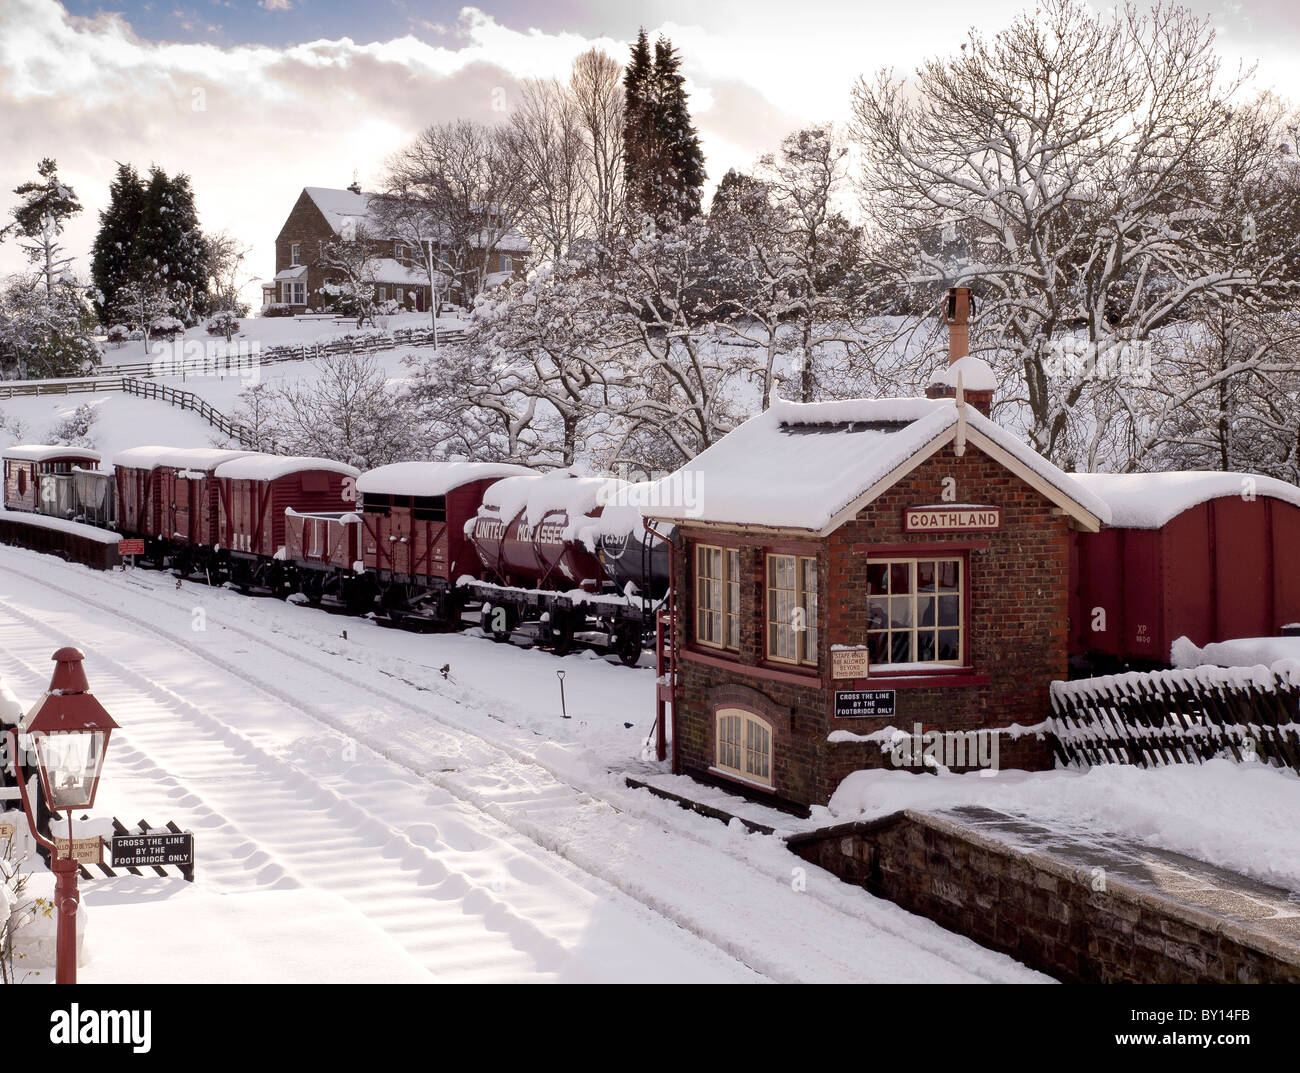 Signal box and rolling stock under blanket of snow at Goathland Stock Photo